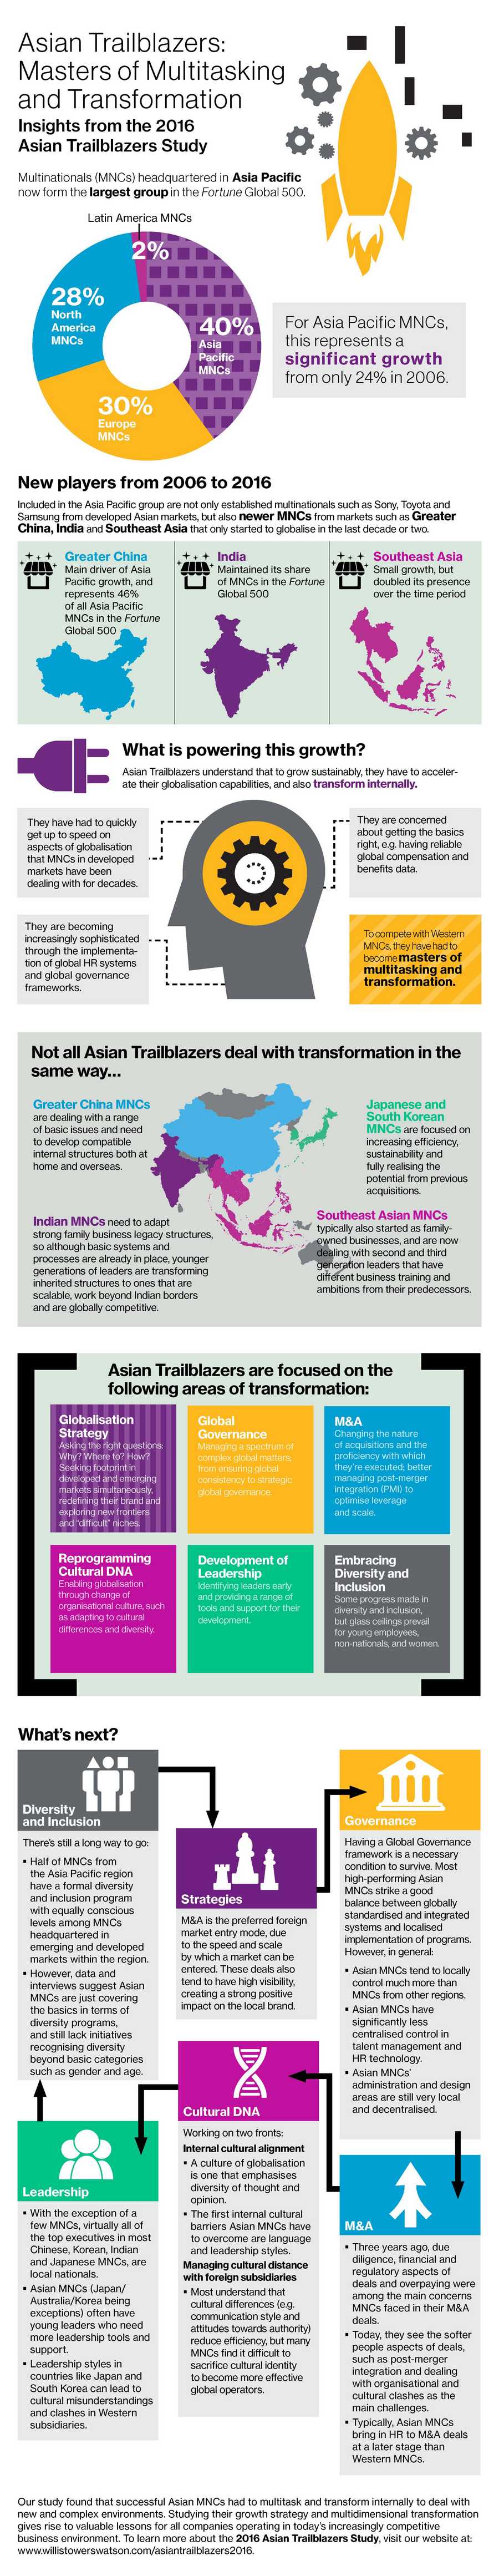 Asian Trailblazers: Masters of Multitasking and Transformation